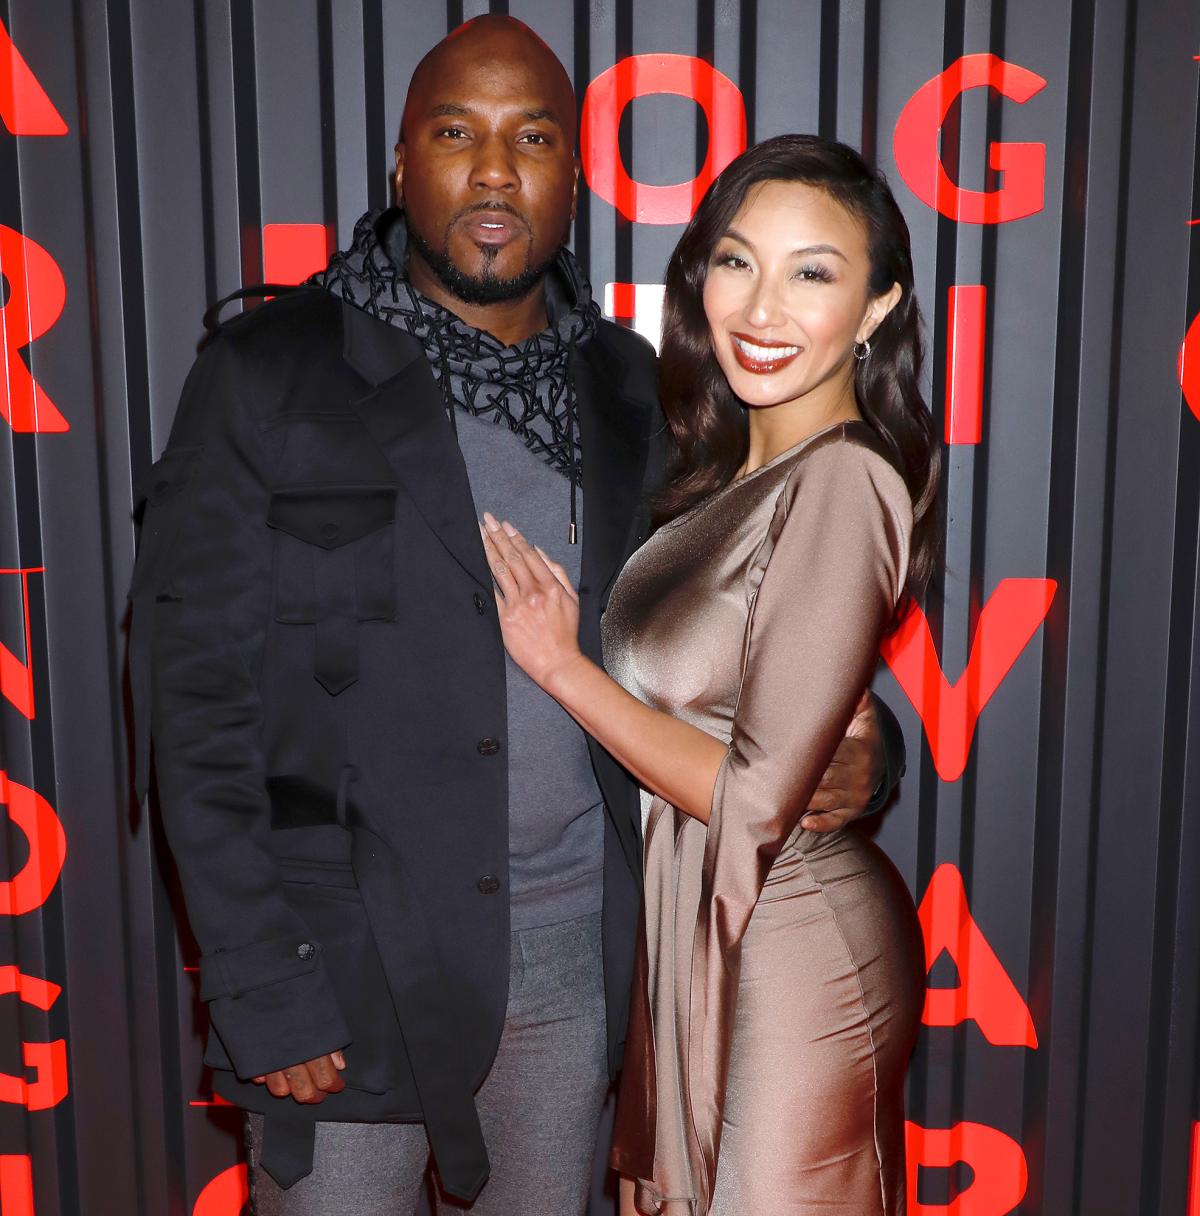 Jeannie Mai Says She Doesn’t Want to ‘Lead’ in Jeezy Marriage | UsWeekly